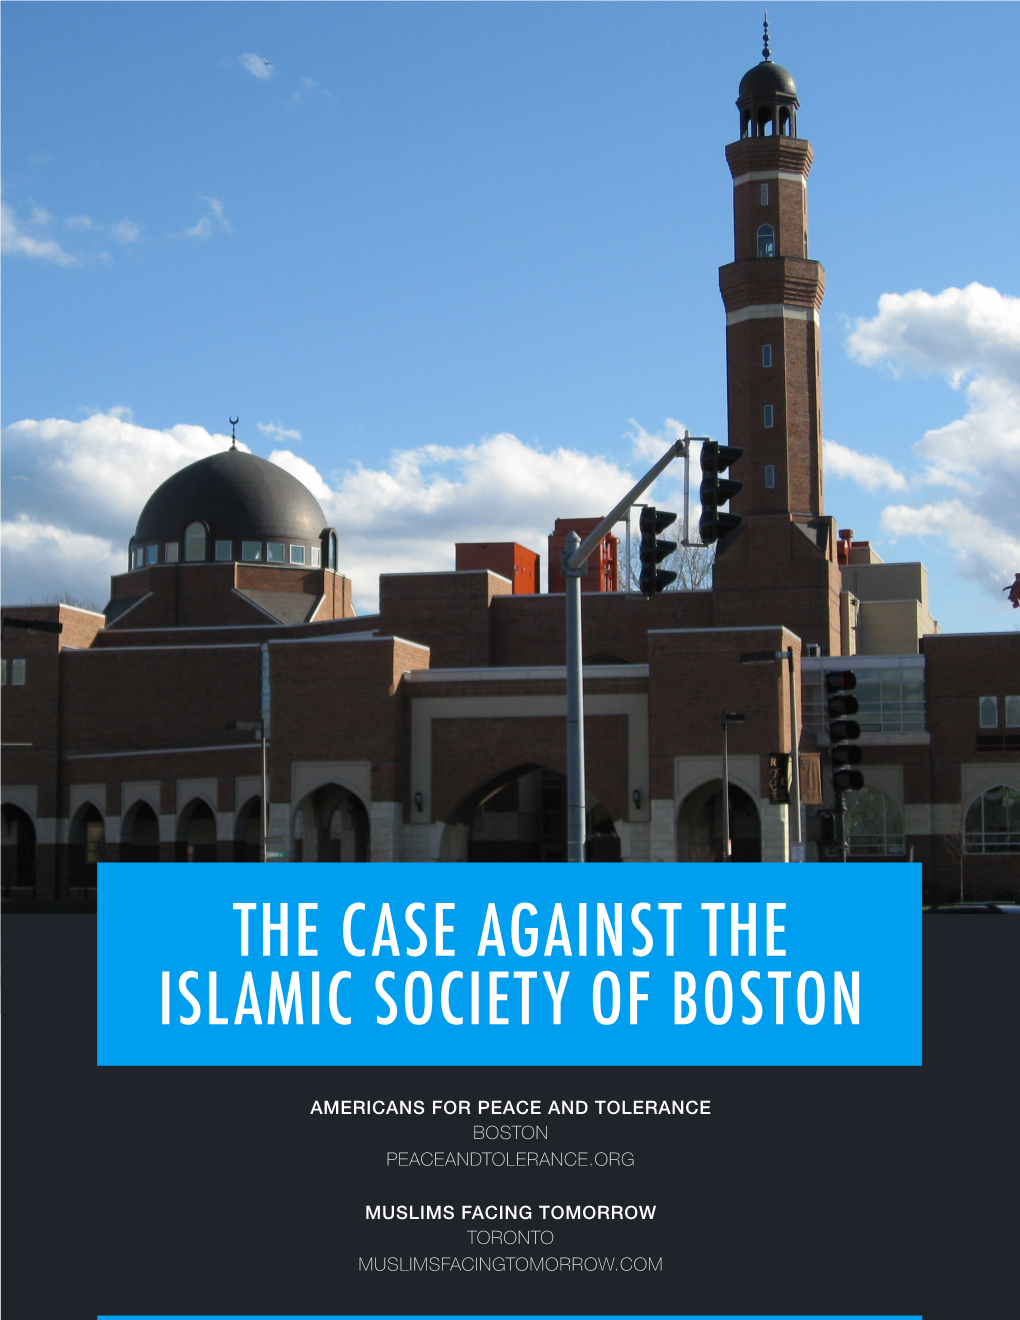 The Case Against the Islamic Society of Boston